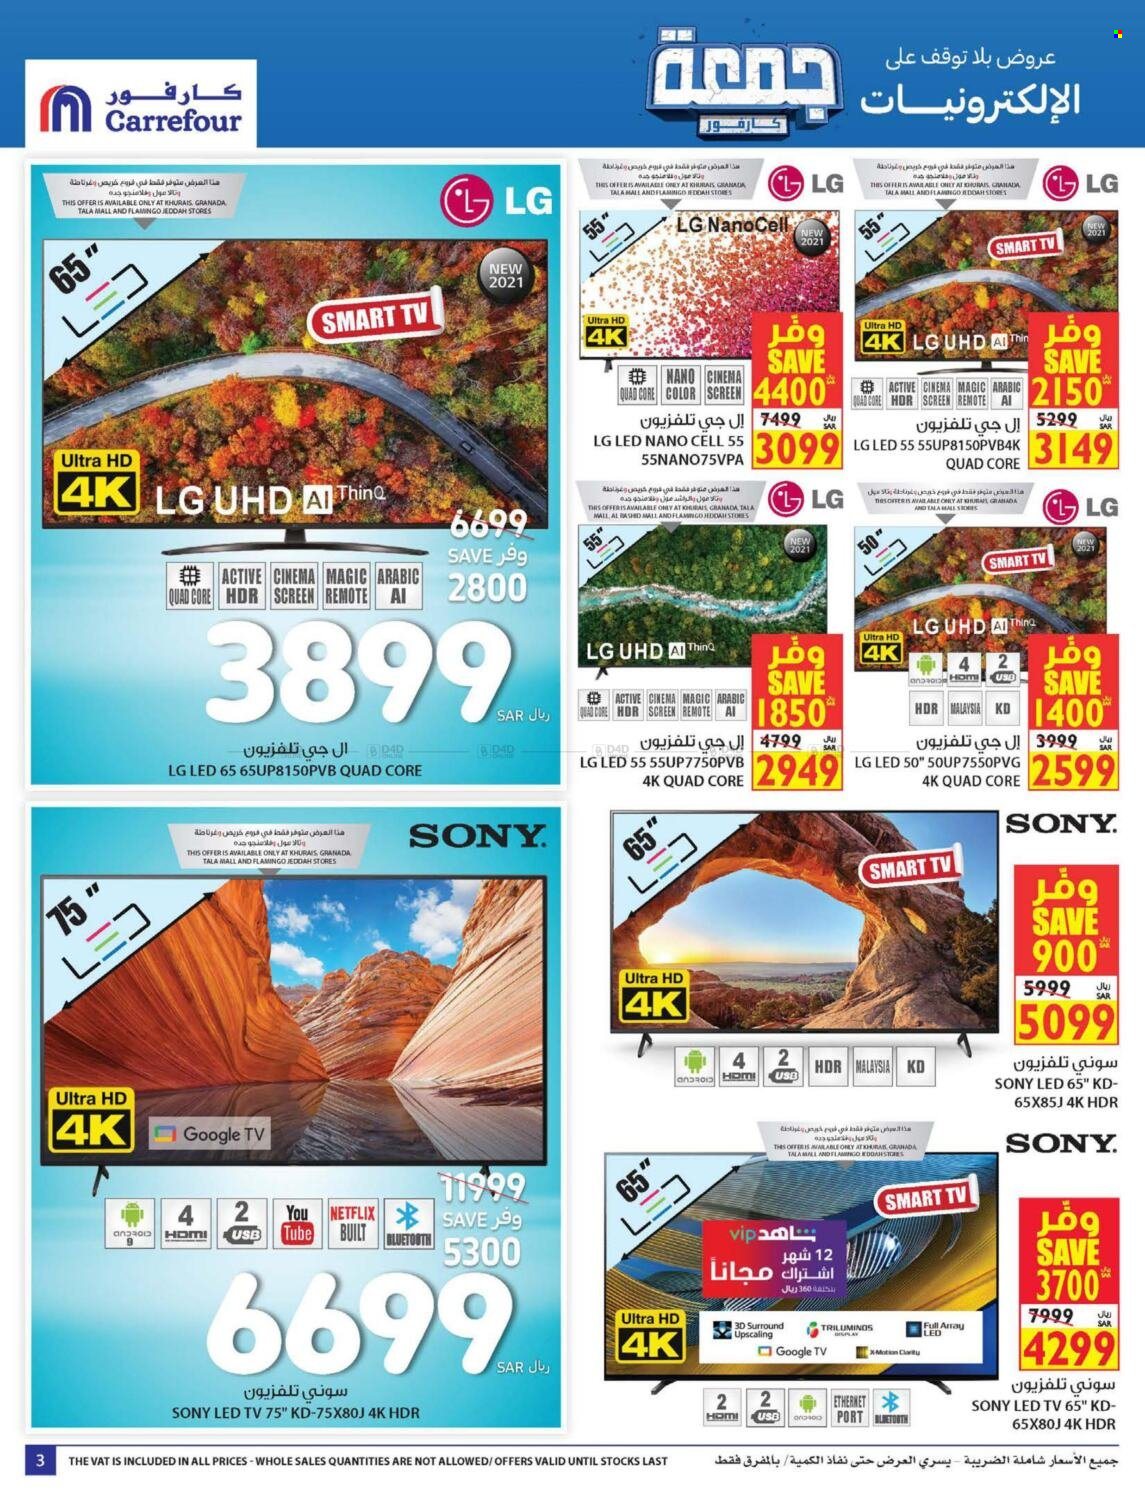 Carrefour flyer  - 10.28.2021 - 11.23.2021. Page 3.